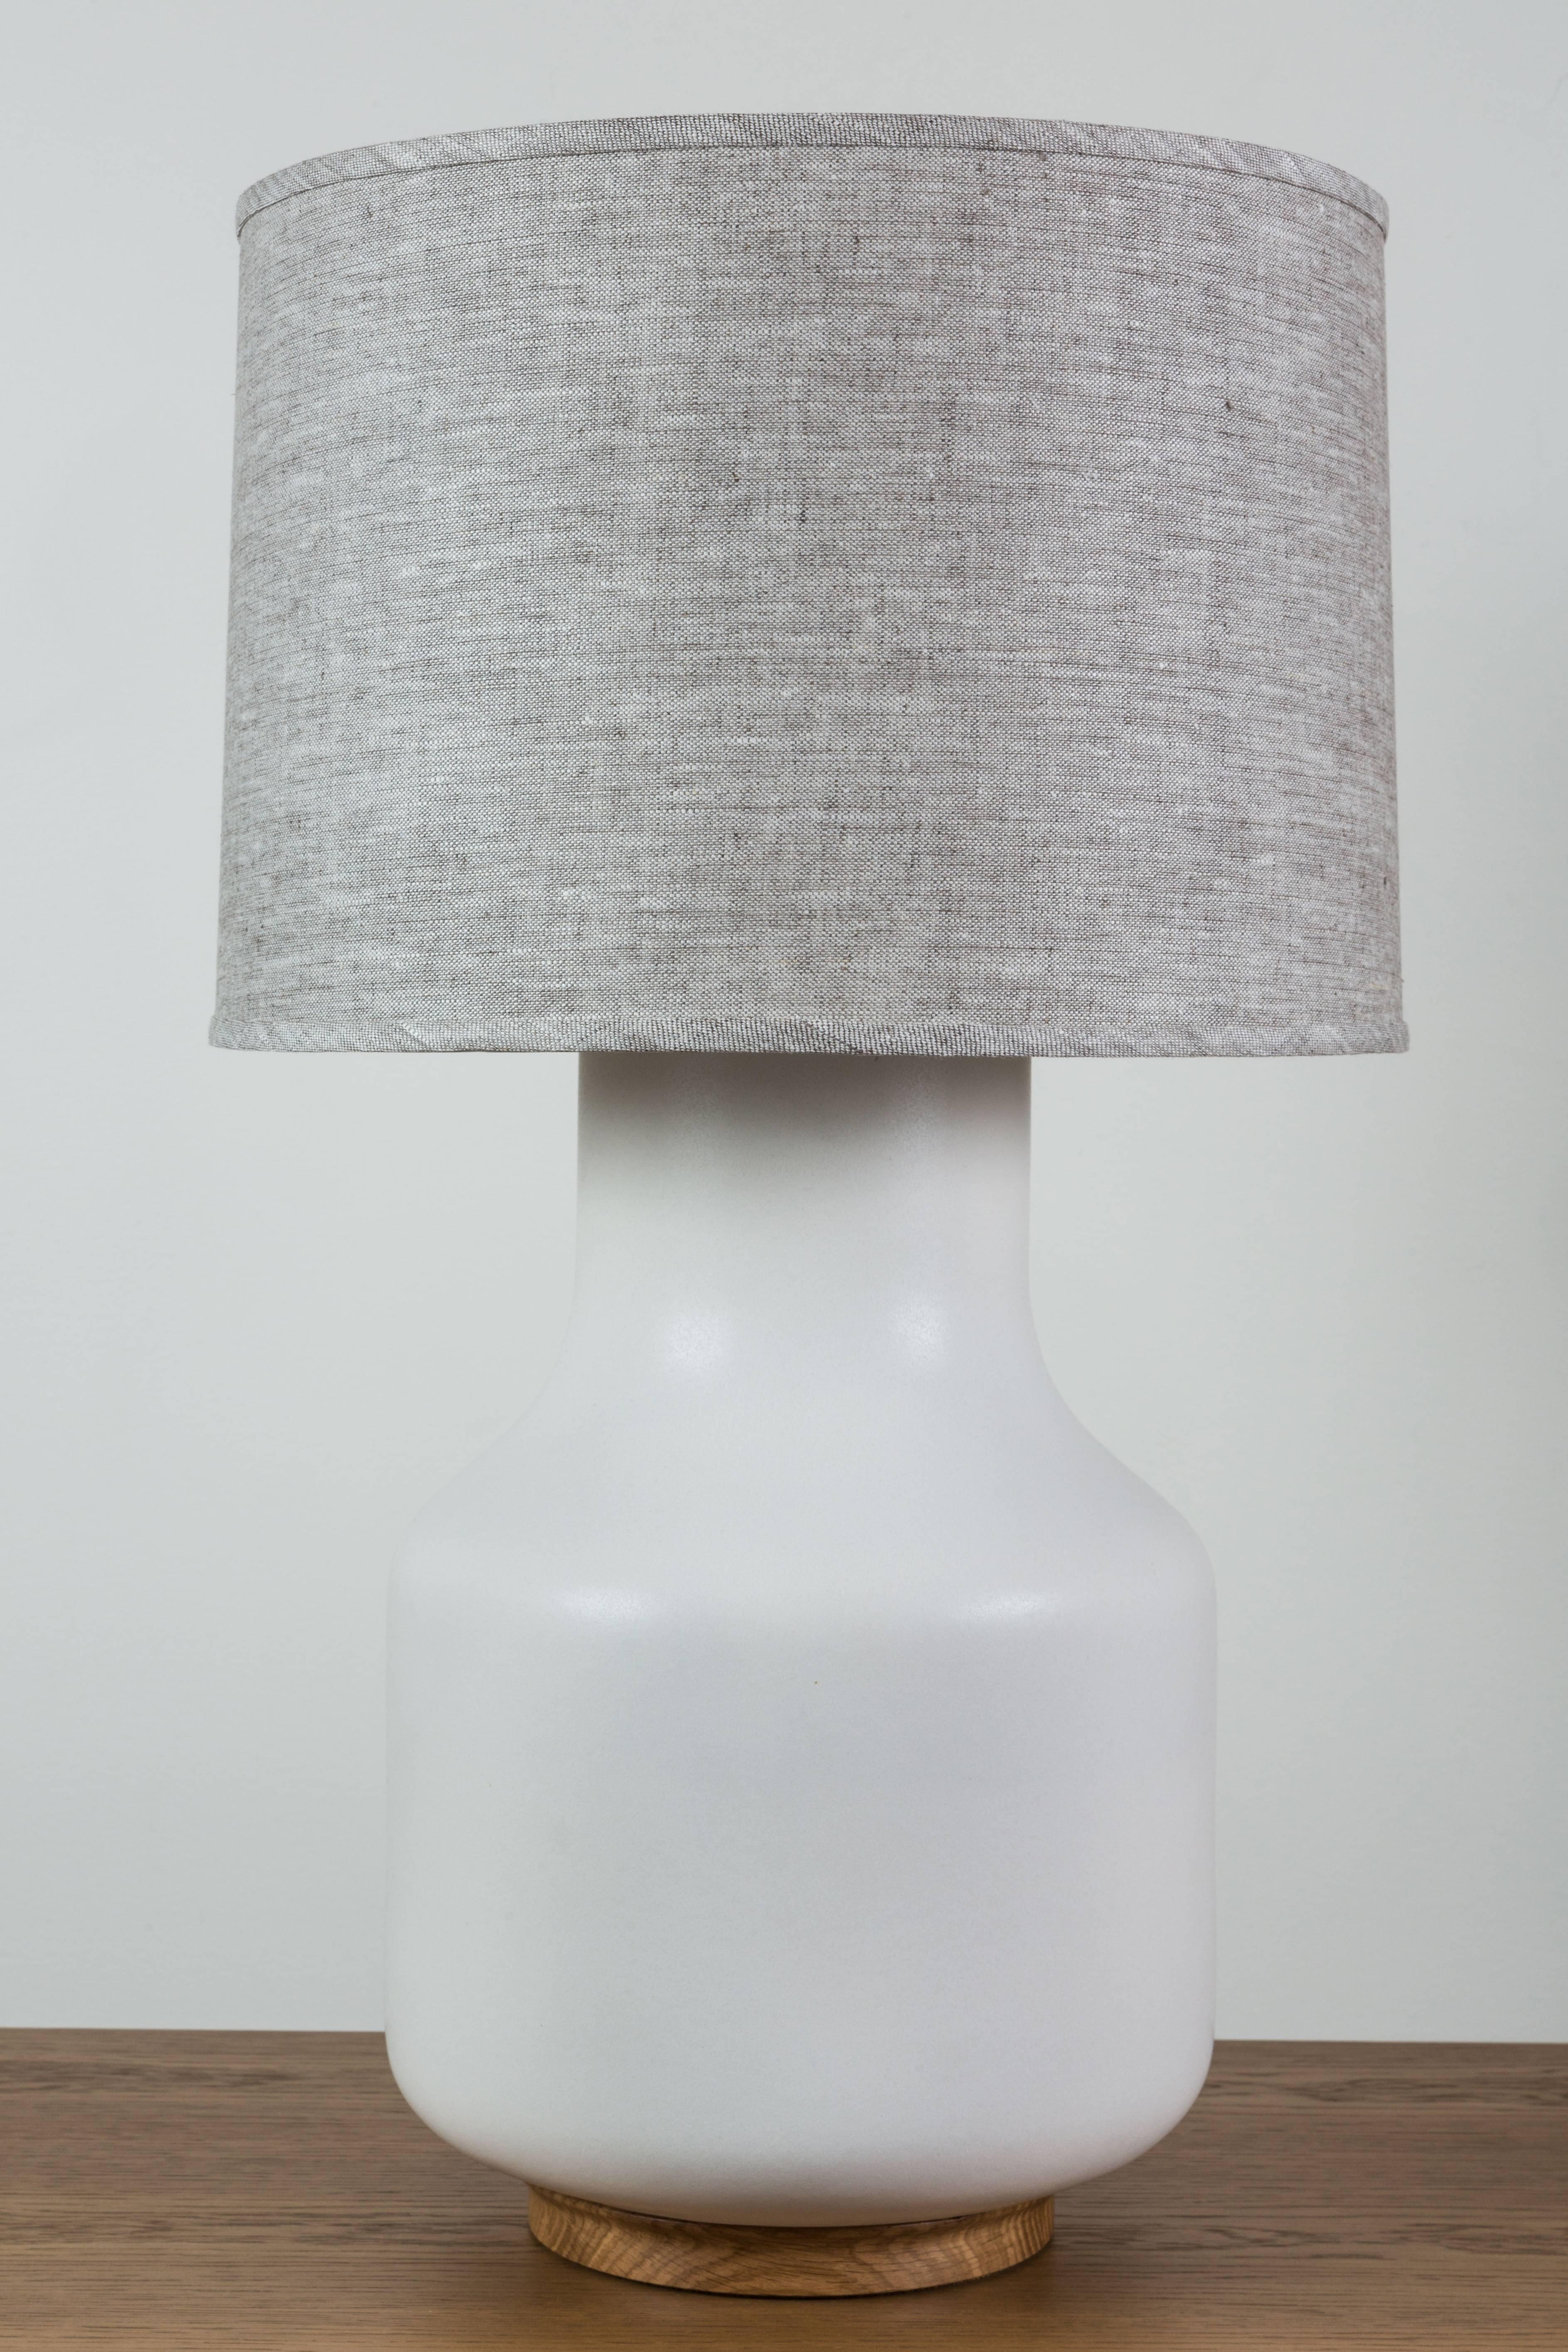 Pair of Simone Lamps by Stone and Sawyer for Lawson-Fenning

Check for availability.